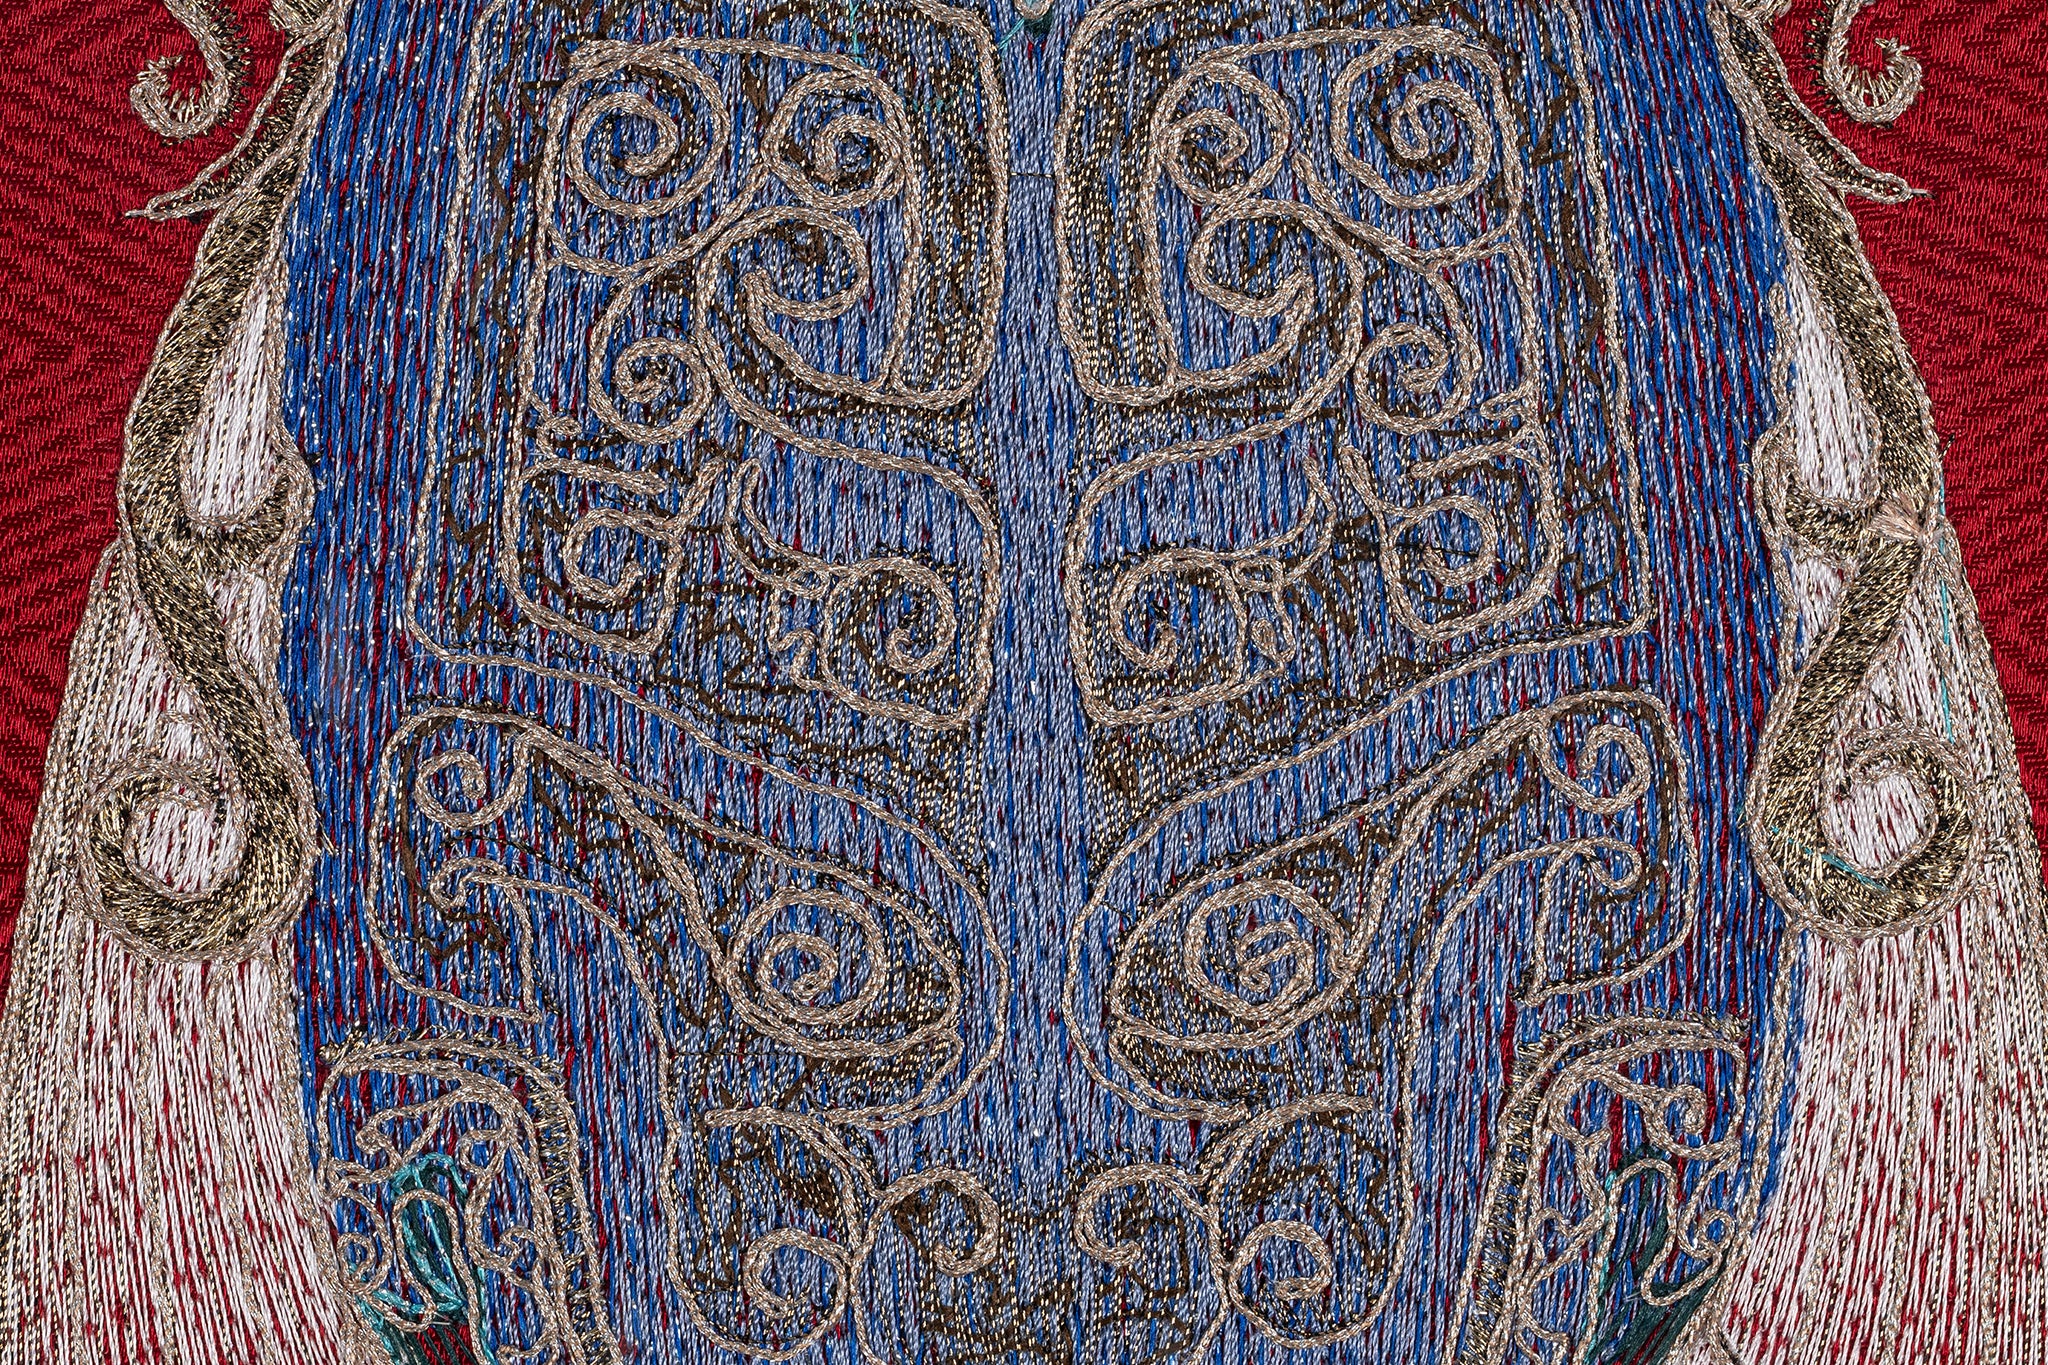 Close-up of the chest details of a framed embroidery artwork featuring a cicada design. The intricate embroidery showcases detailed patterns in blue and white thread on a red background.